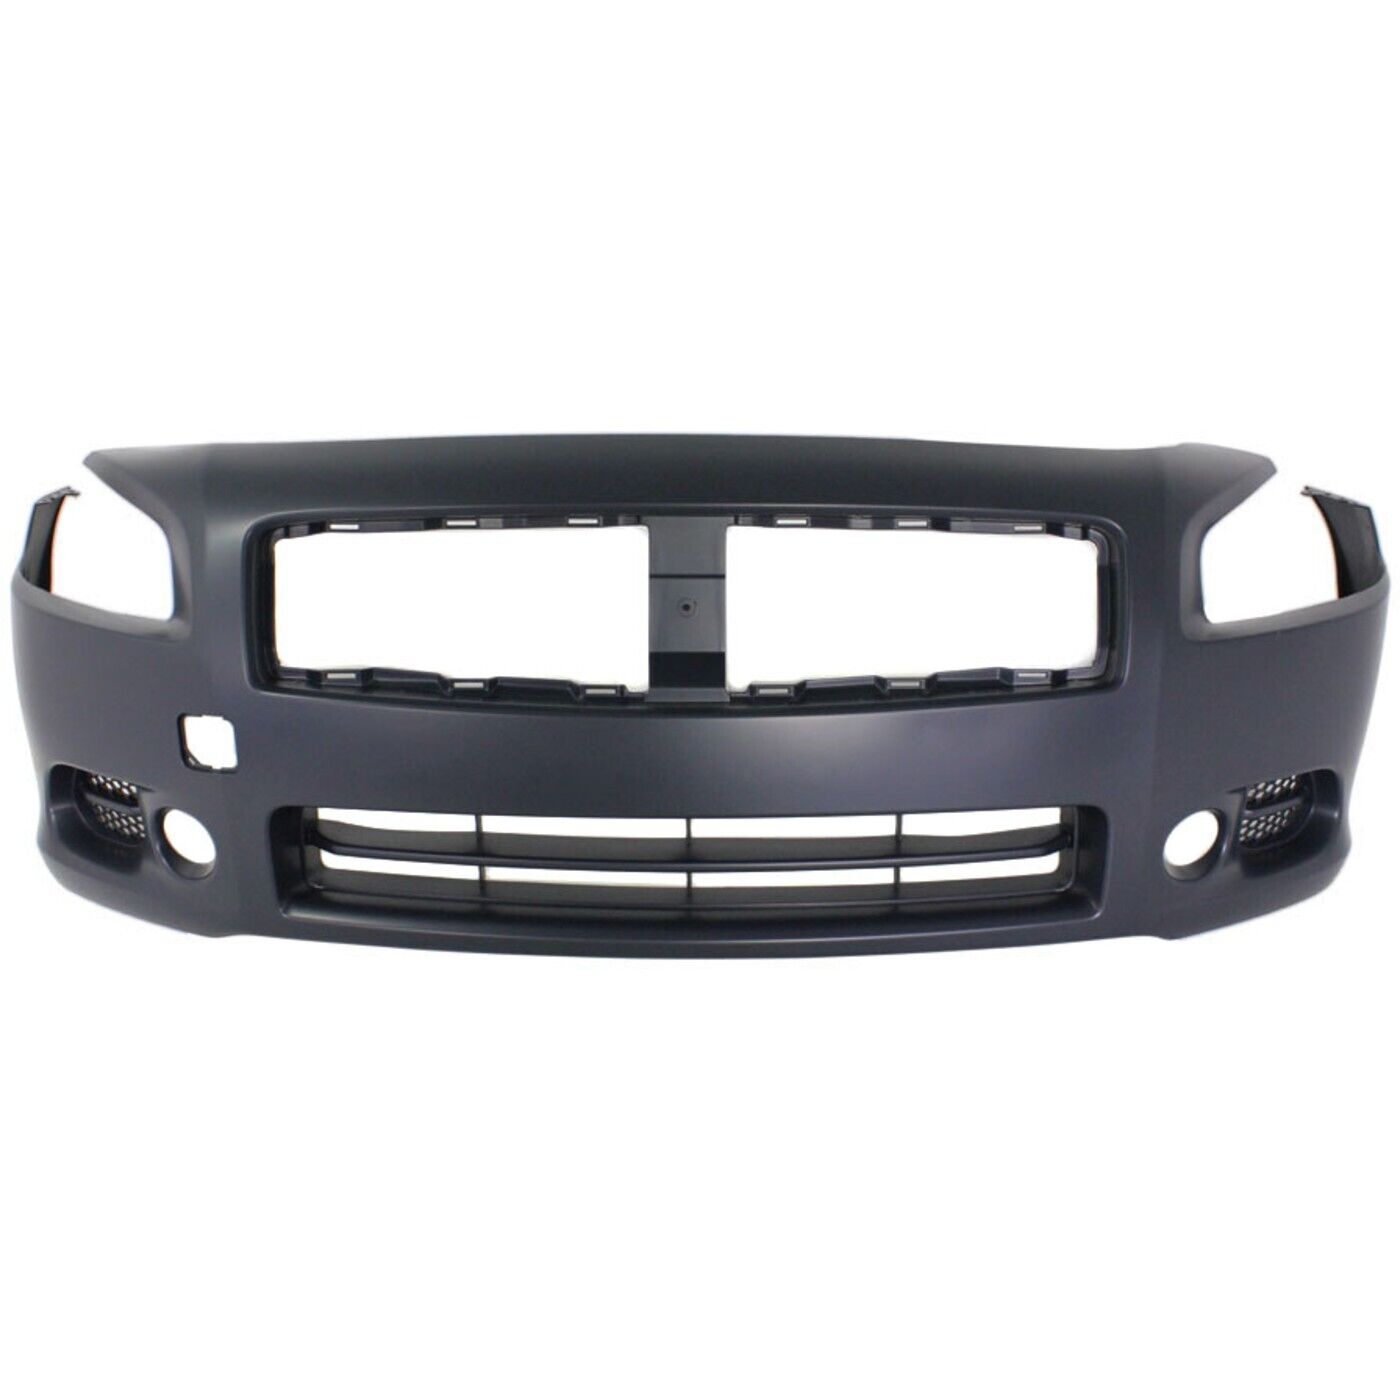 Front Bumper Cover For 2009-2014 Nissan Maxima w/ fog lamp holes Primed